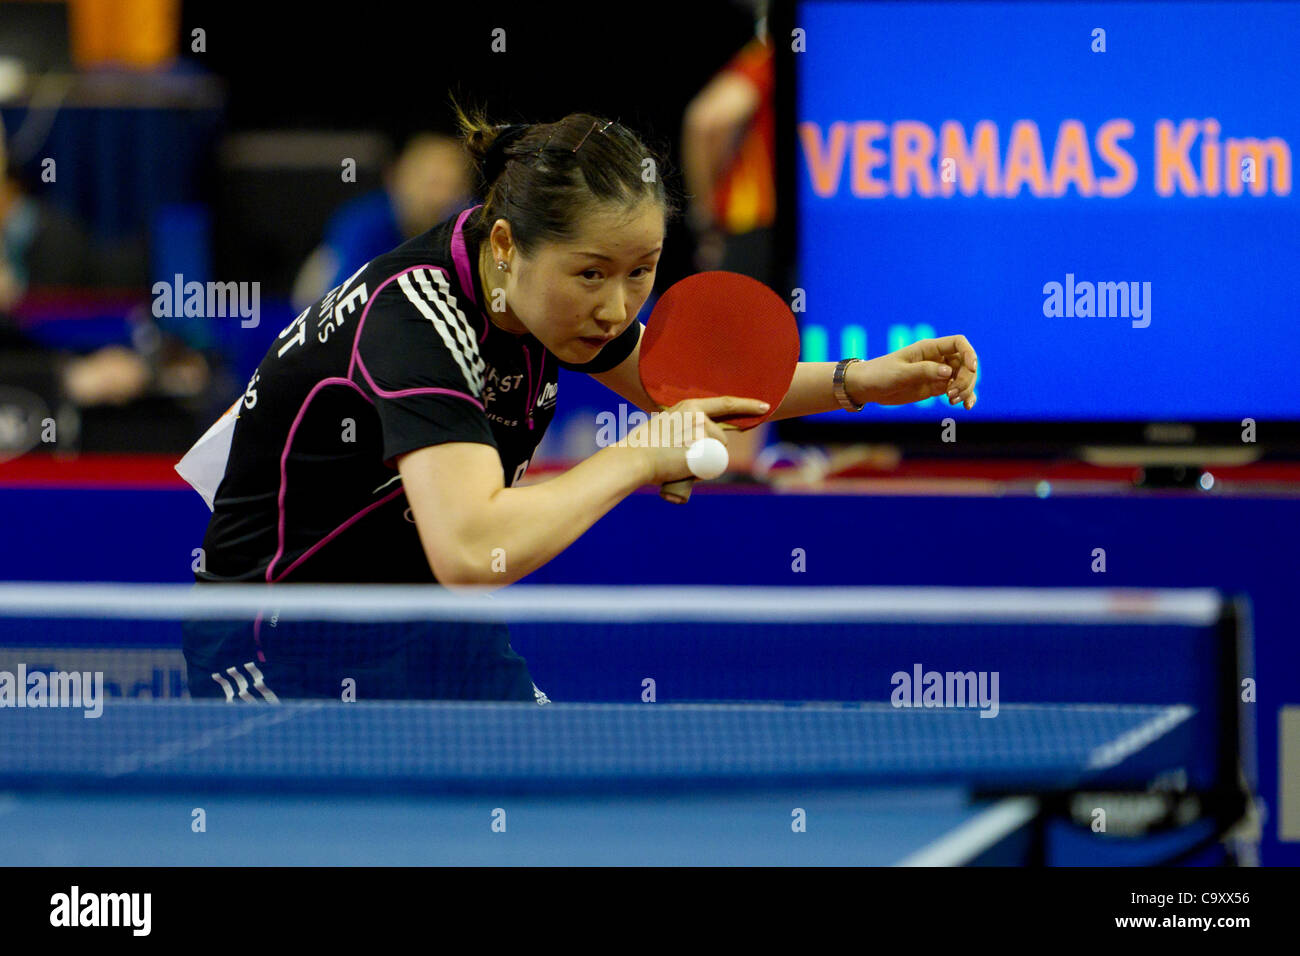 EINDHOVEN, THE NETHERLANDS, 03/03/2012. Table tennis player Jie Li (pictured) wins her match against Kim Vermaas at the Dutch table tennis championships 2012 in Eindhoven. Stock Photo